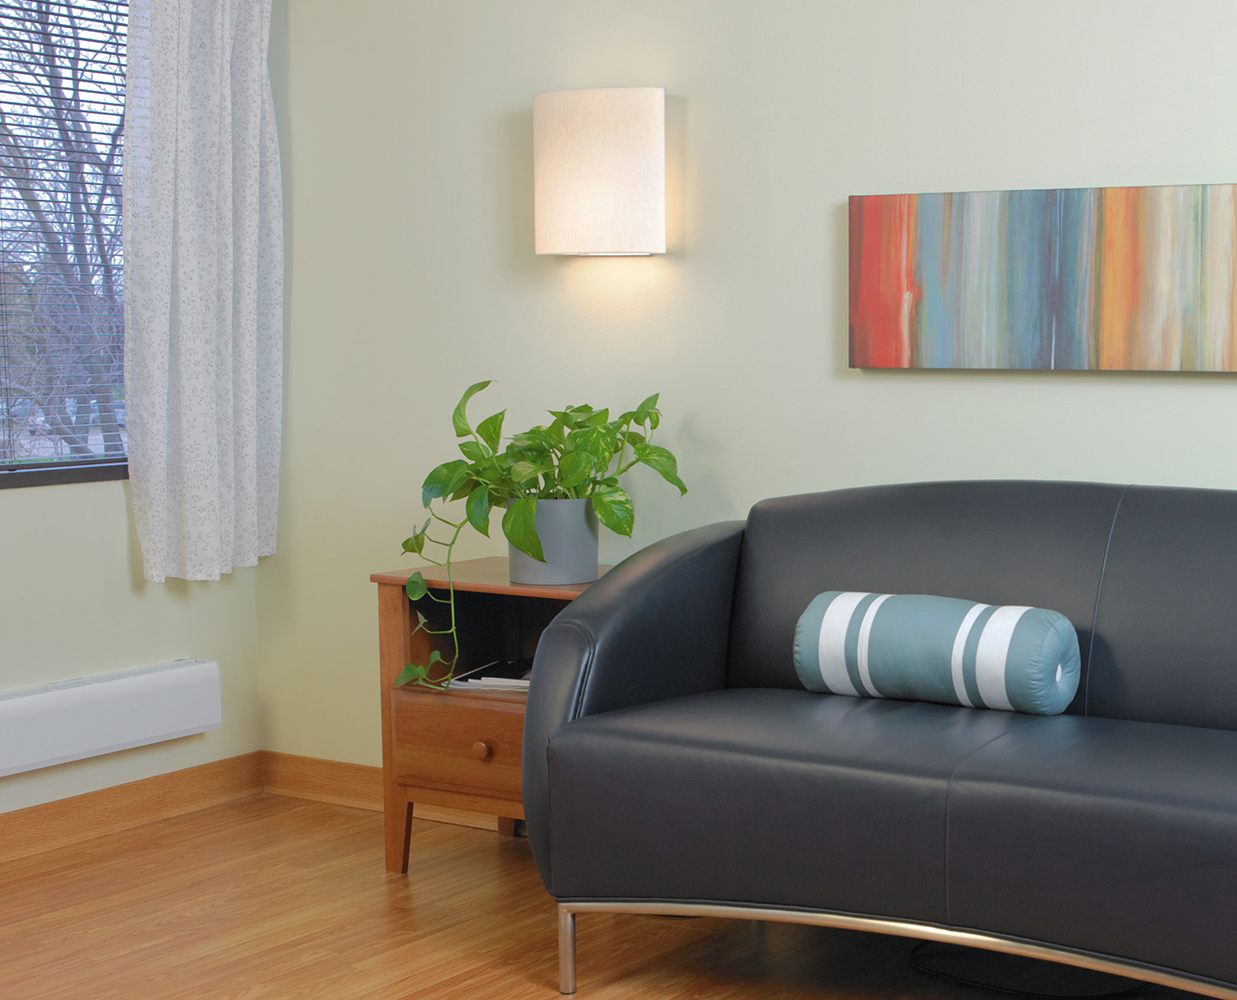 Unity wall sconce provides warm, inviting light in a hospitality lighting design near a sofa and side table.